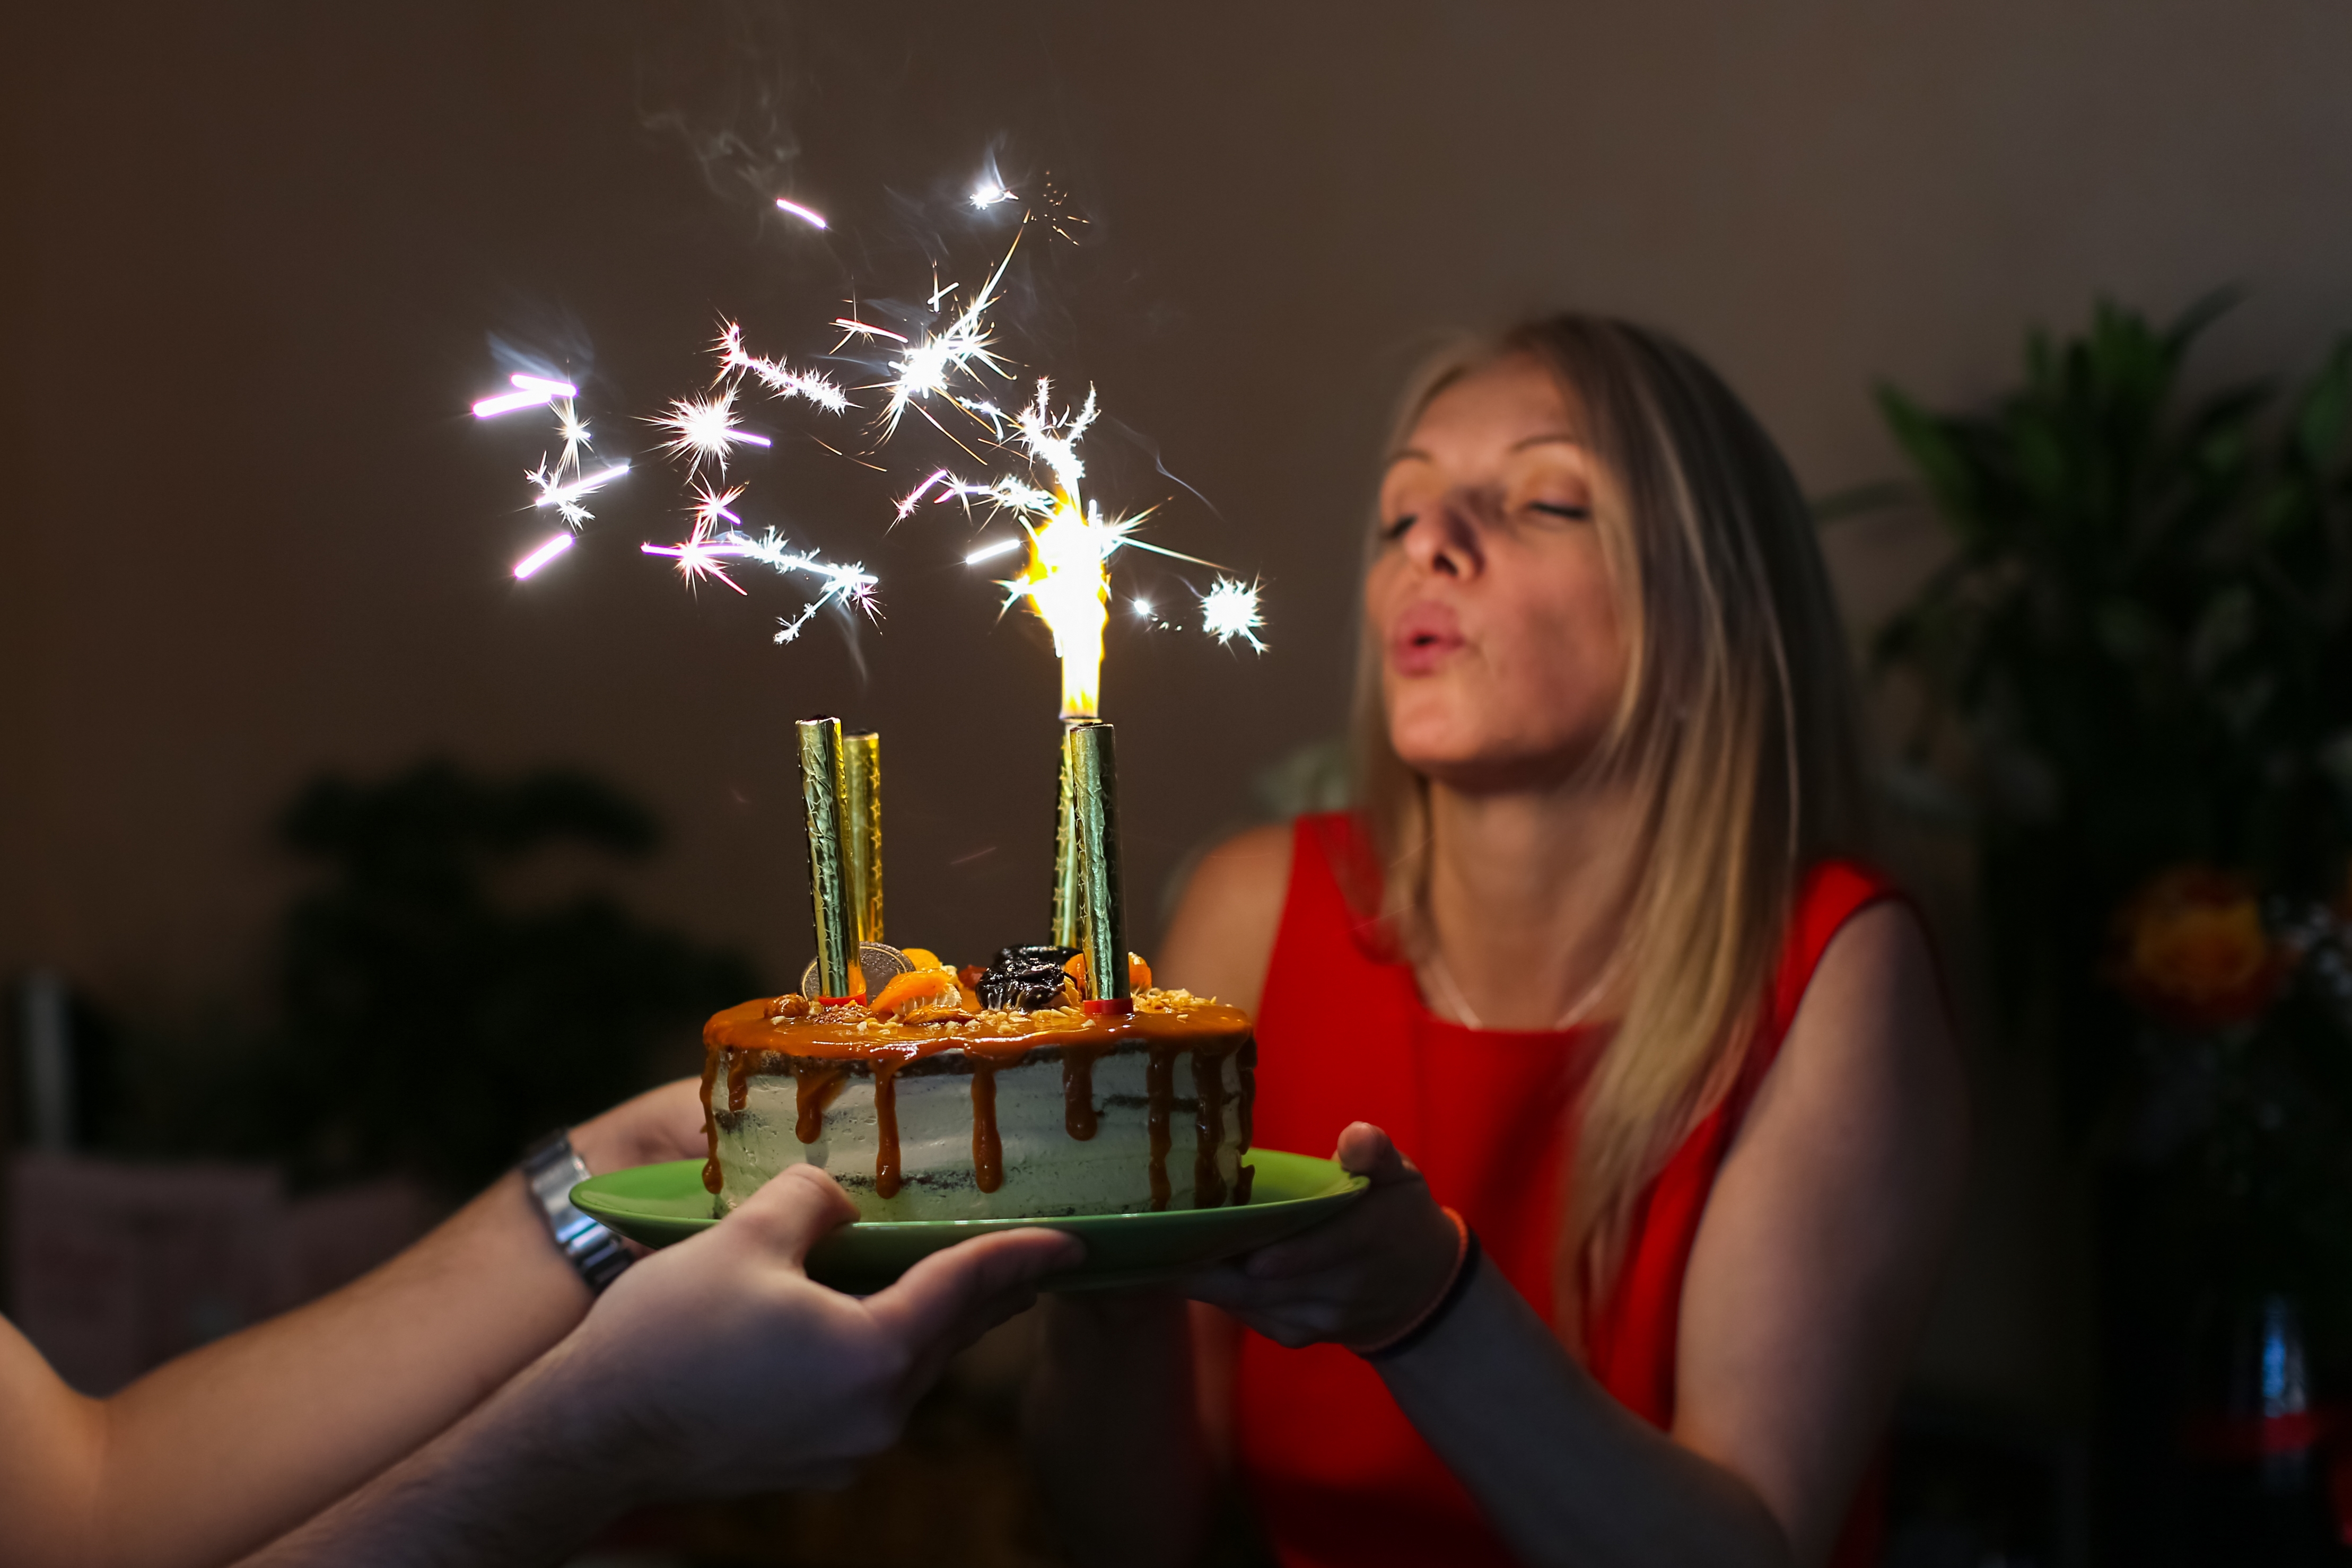 A woman holding a birthday cake | Source: Shutterstock